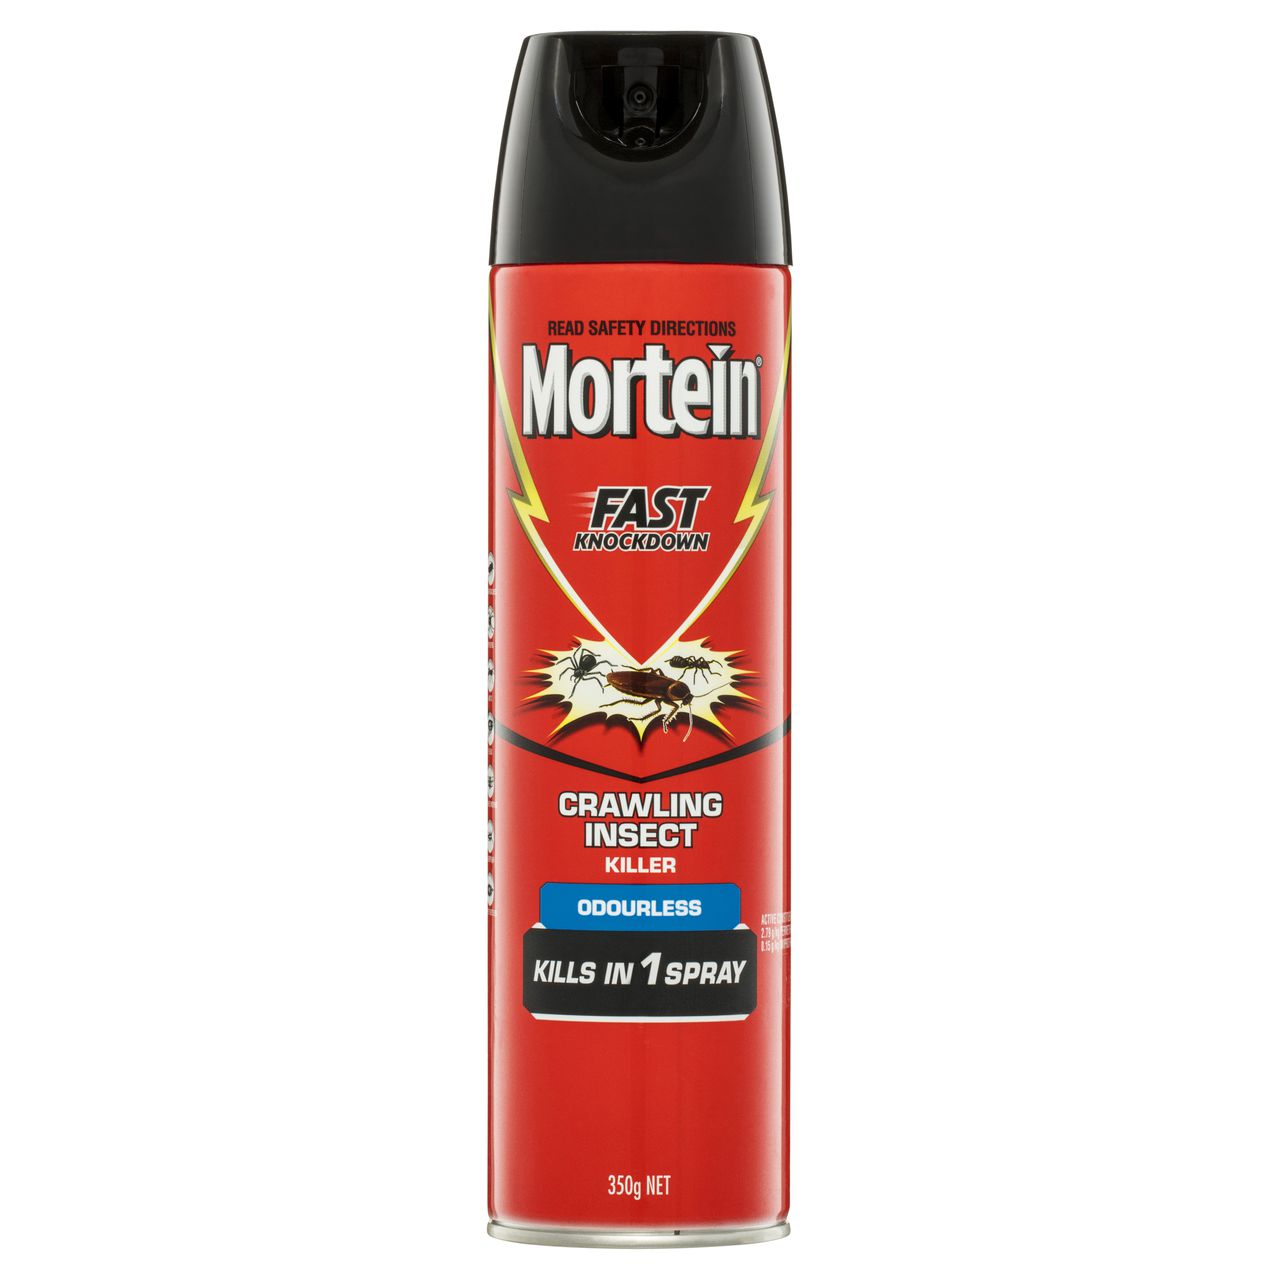 Mortein Kill & Protect Odourless Crawling Insect Surface Spray 350g